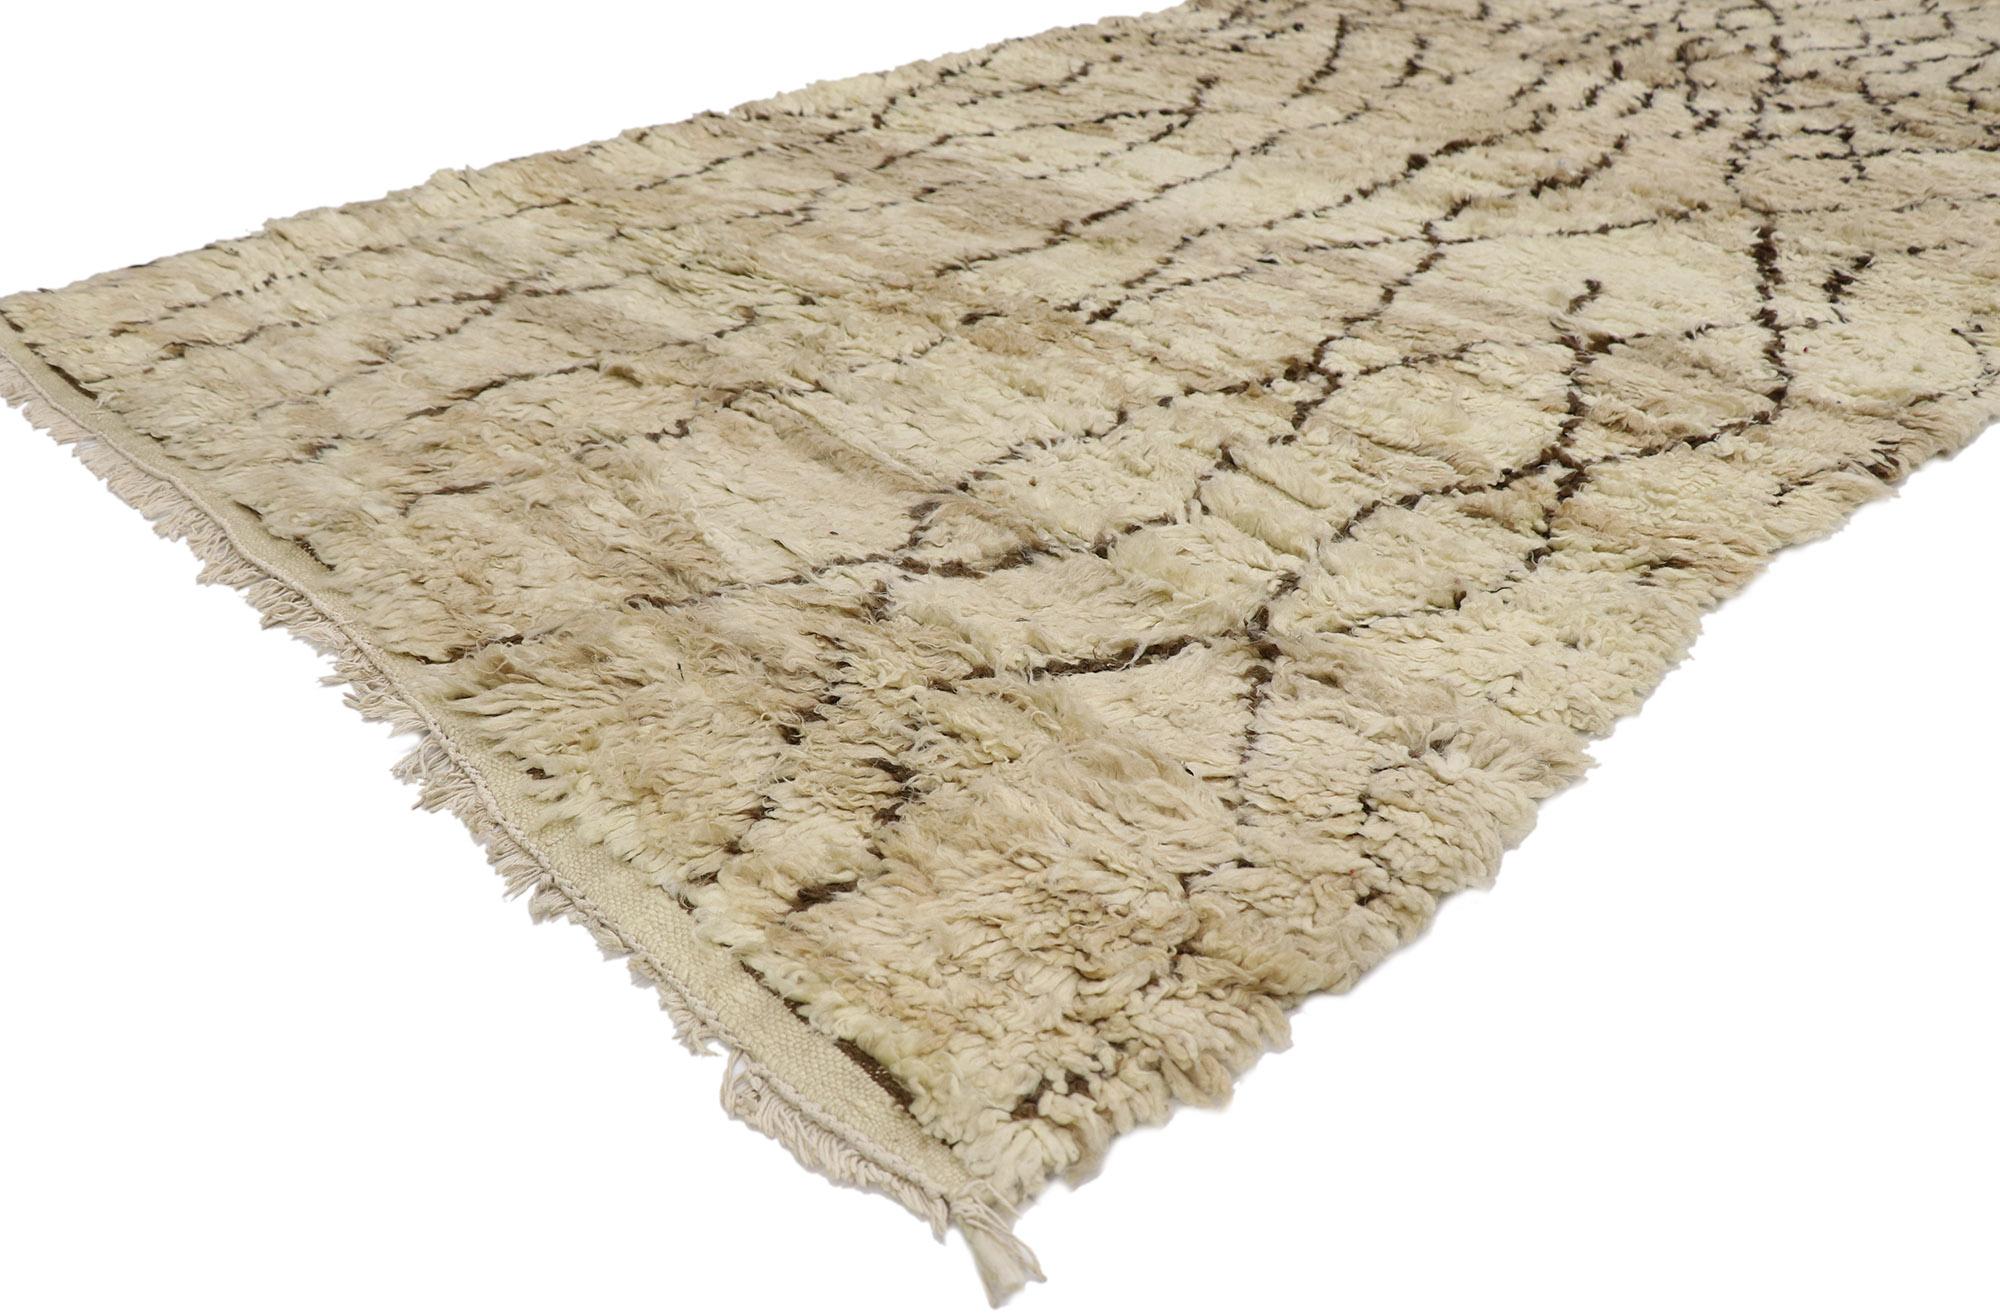 21380 vintage Berber Moroccan rug with Modern Monochrome Tribal style 04'11 x 09'04. With its simplicity, plush pile and tribal style, this hand knotted wool vintage Berber Moroccan rug is a captivating vision of woven beauty. It features an